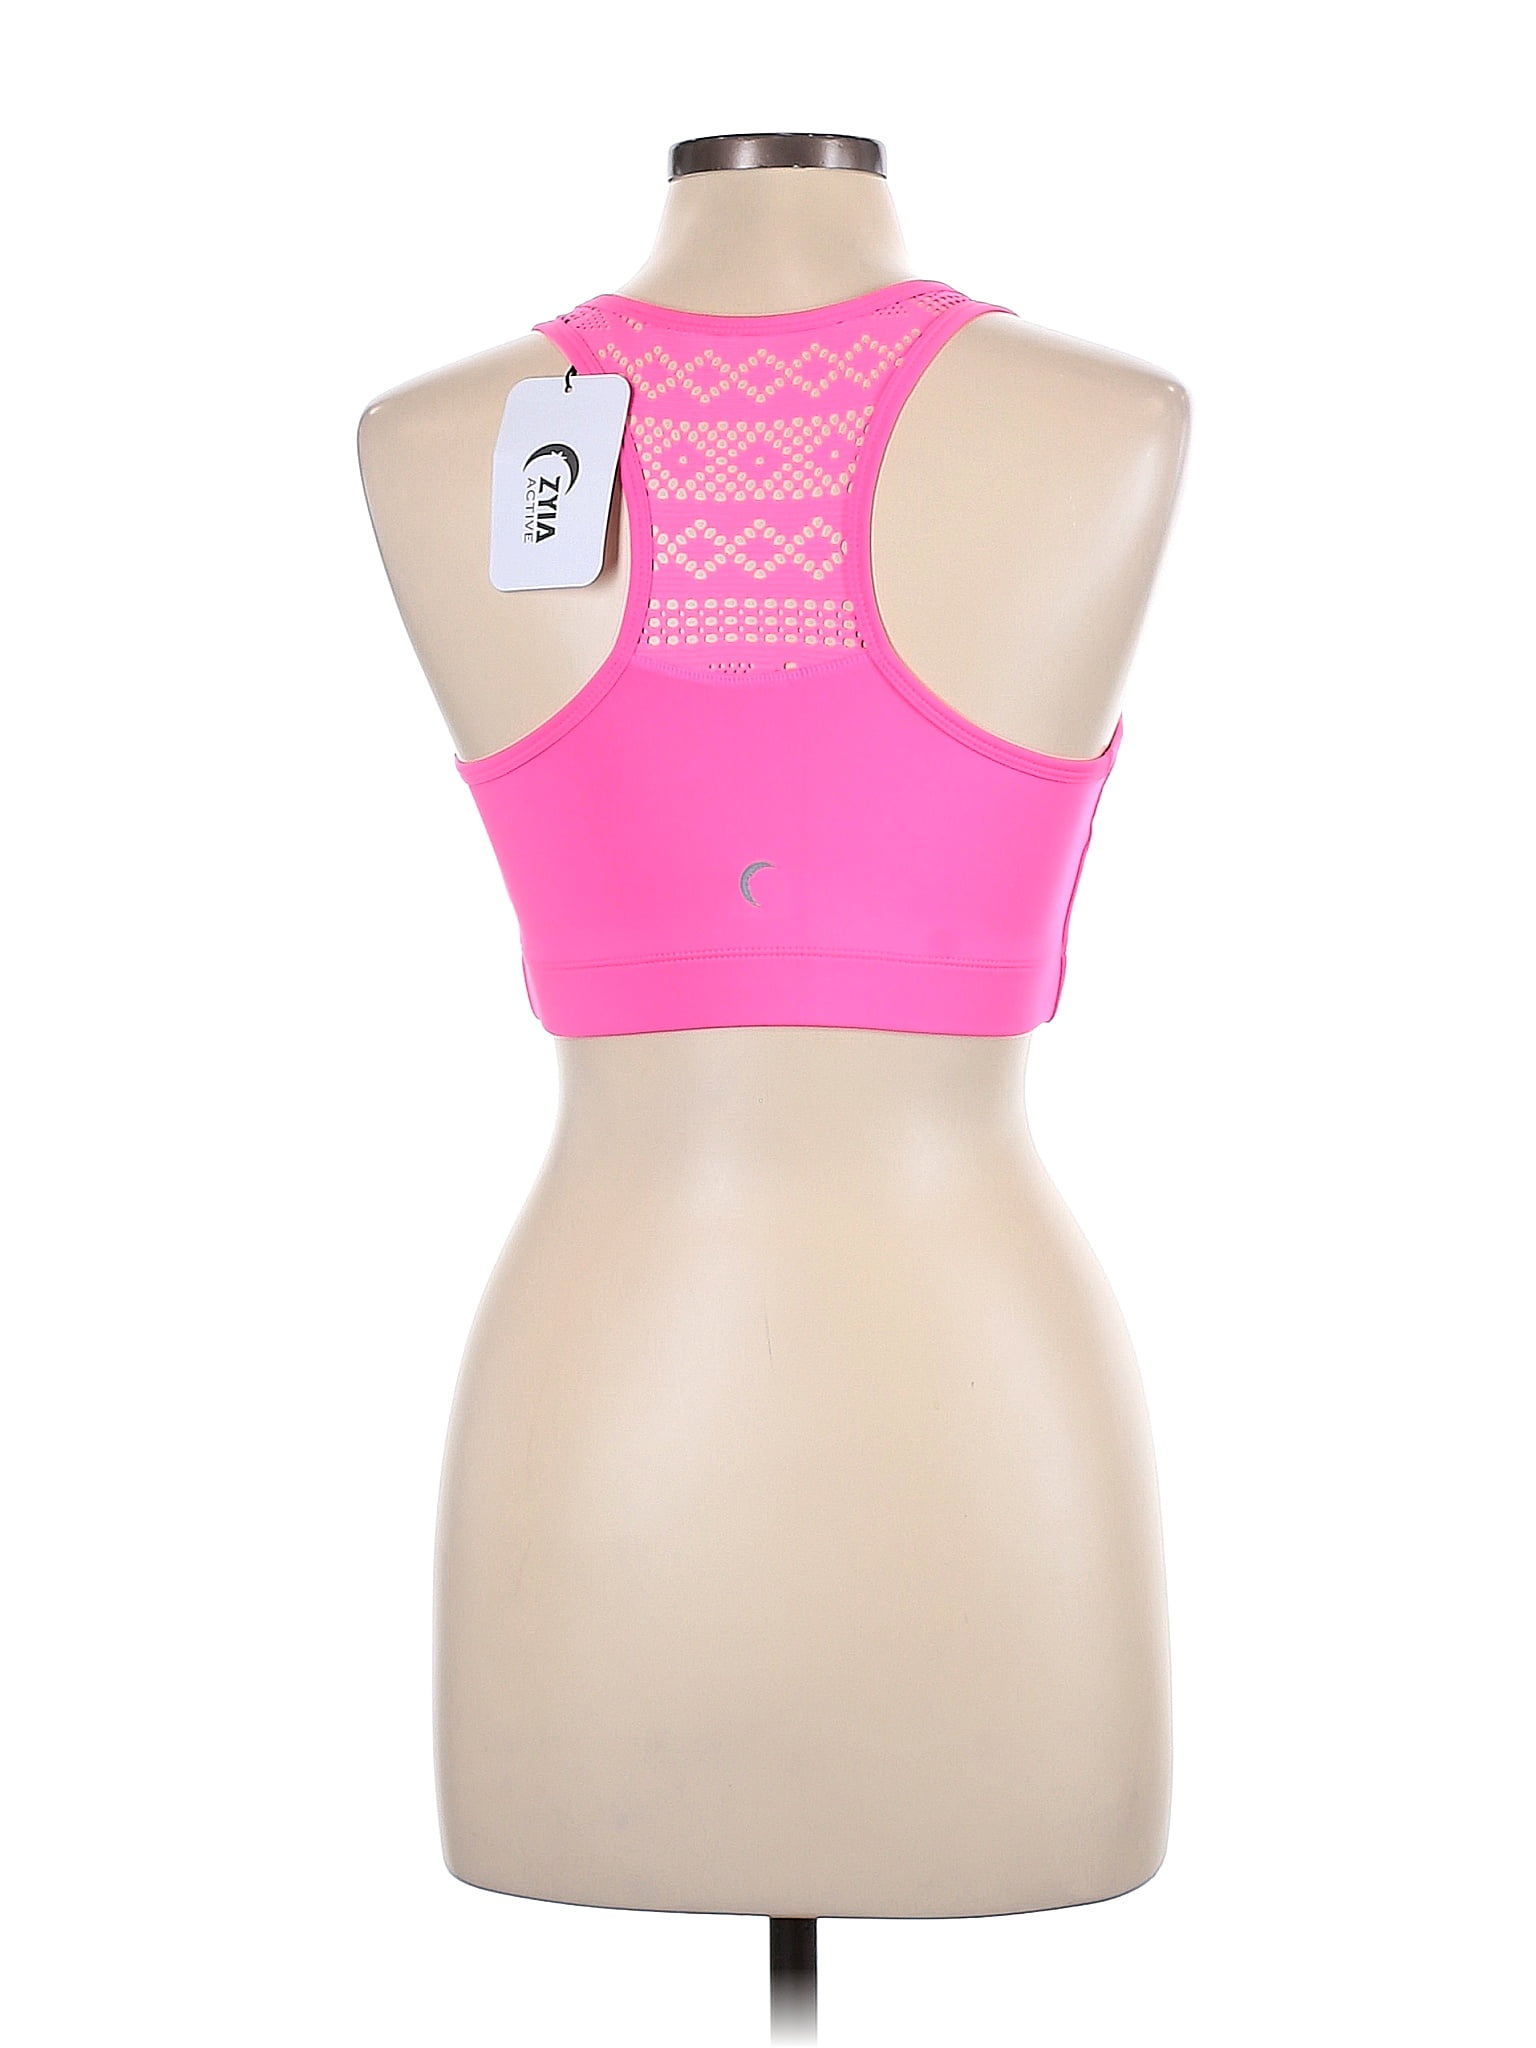 Zyia Active Pink Sports Bra Size L - 49% off